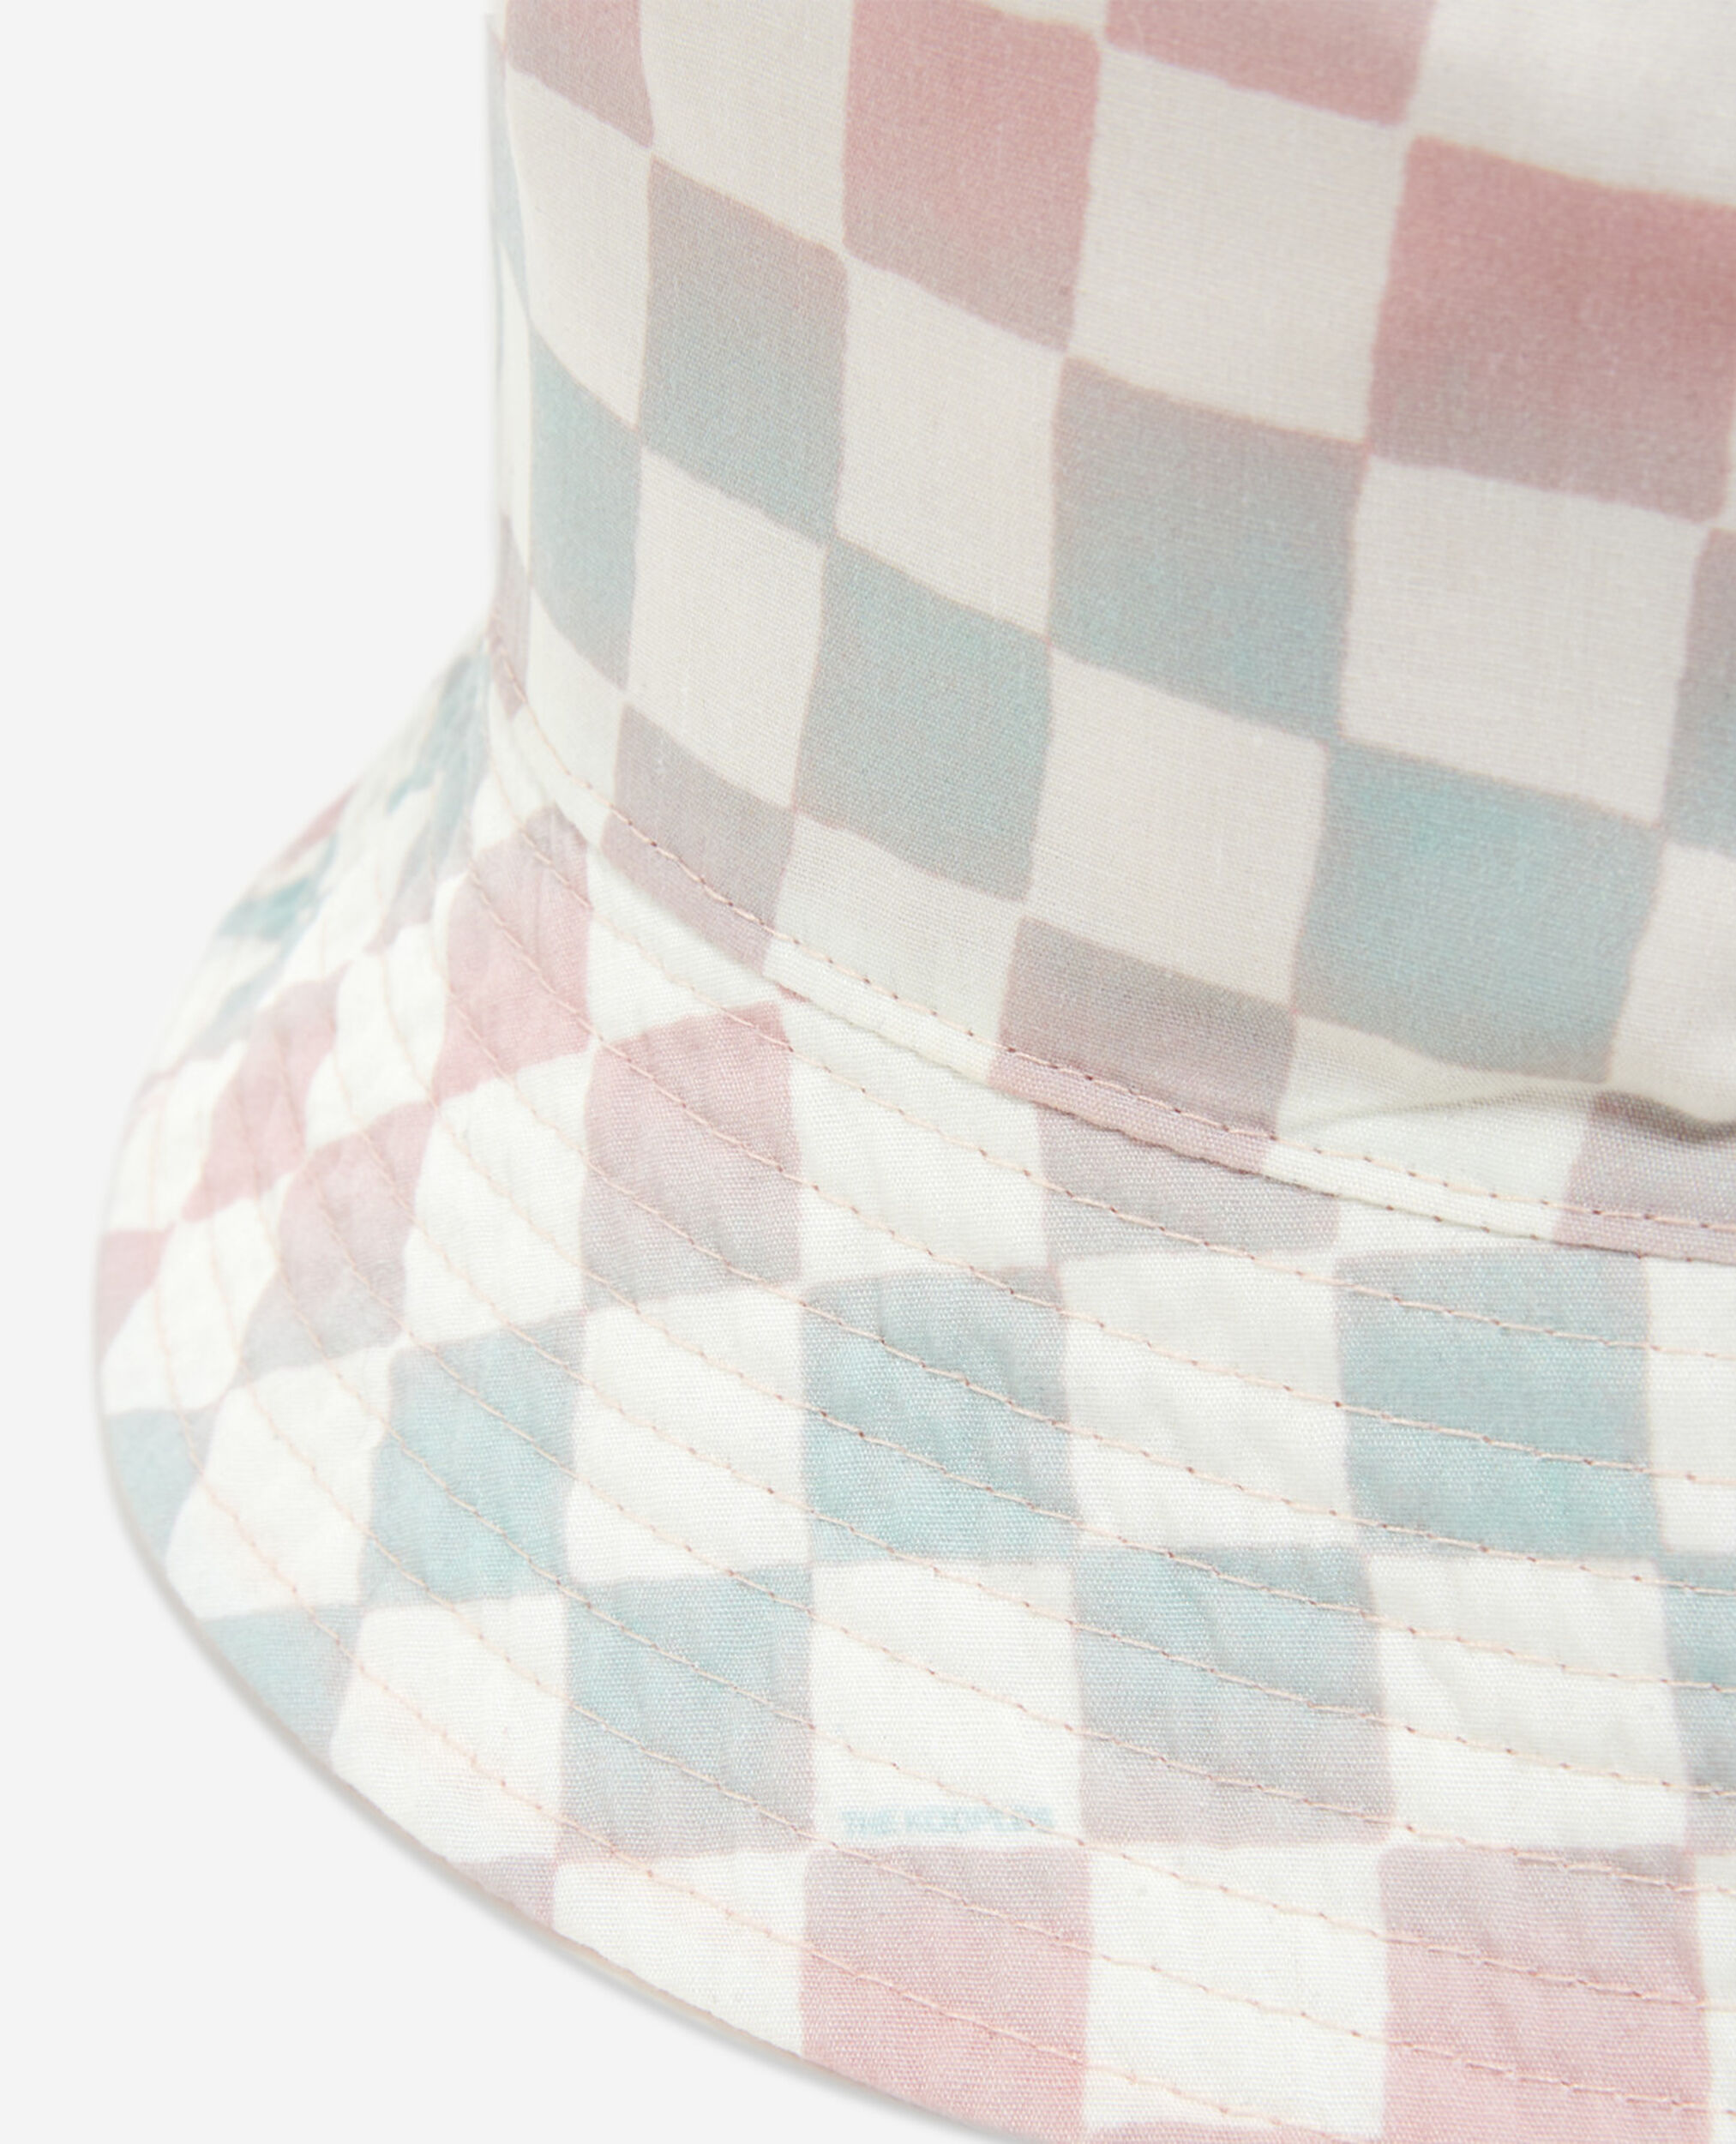 Pink bucket hat w/ checkerboard print inside, LIGHT PINK, hi-res image number null